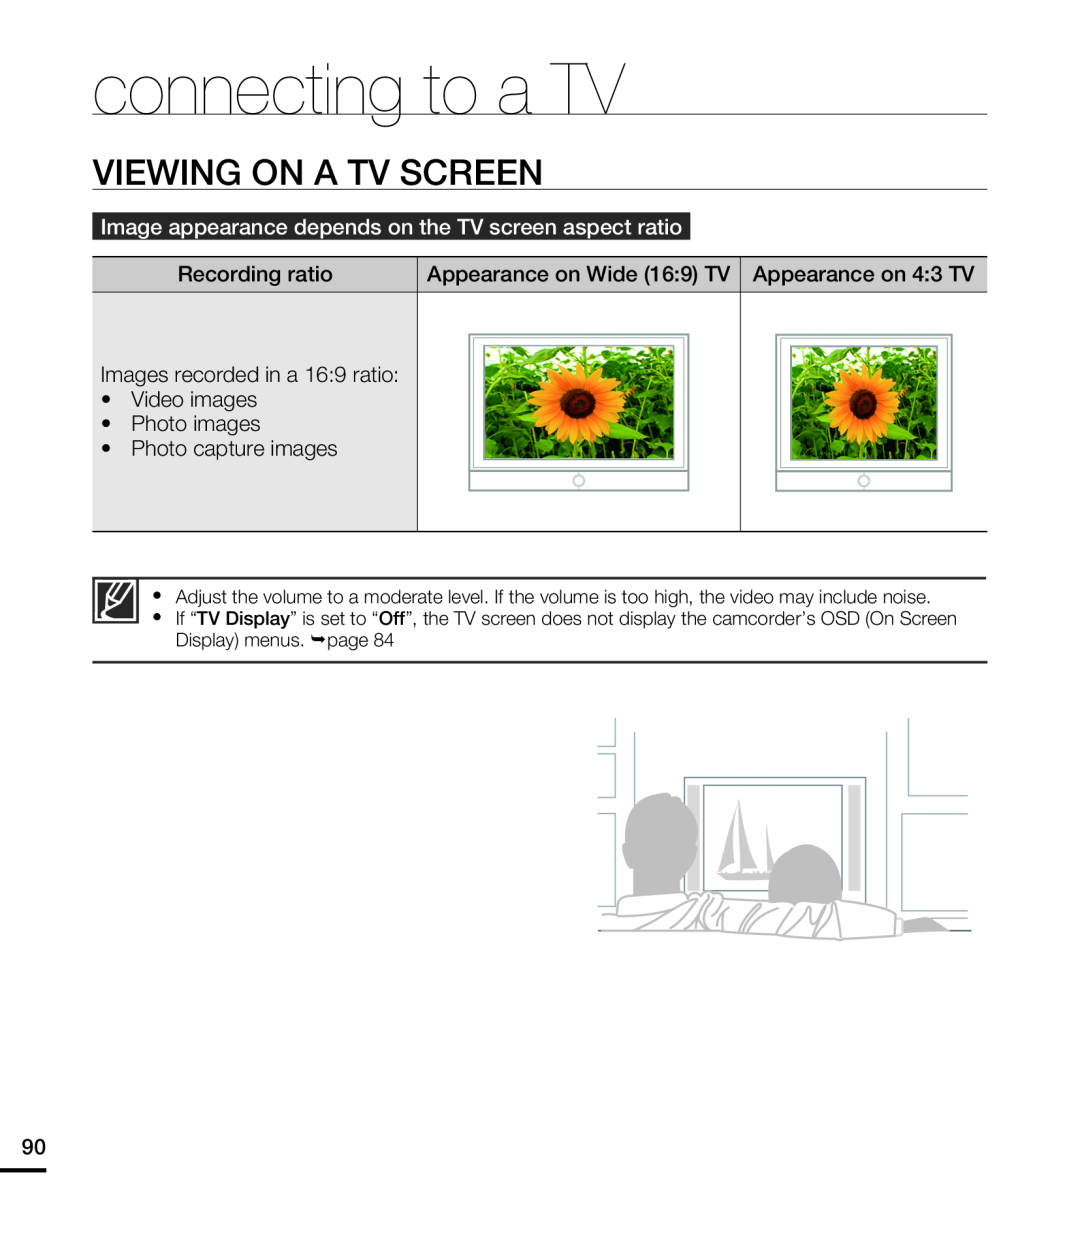 Samsung HMX-T10WP/EDC Viewing On A Tv Screen, Image appearance depends on the TV screen aspect ratio, connecting to a TV 